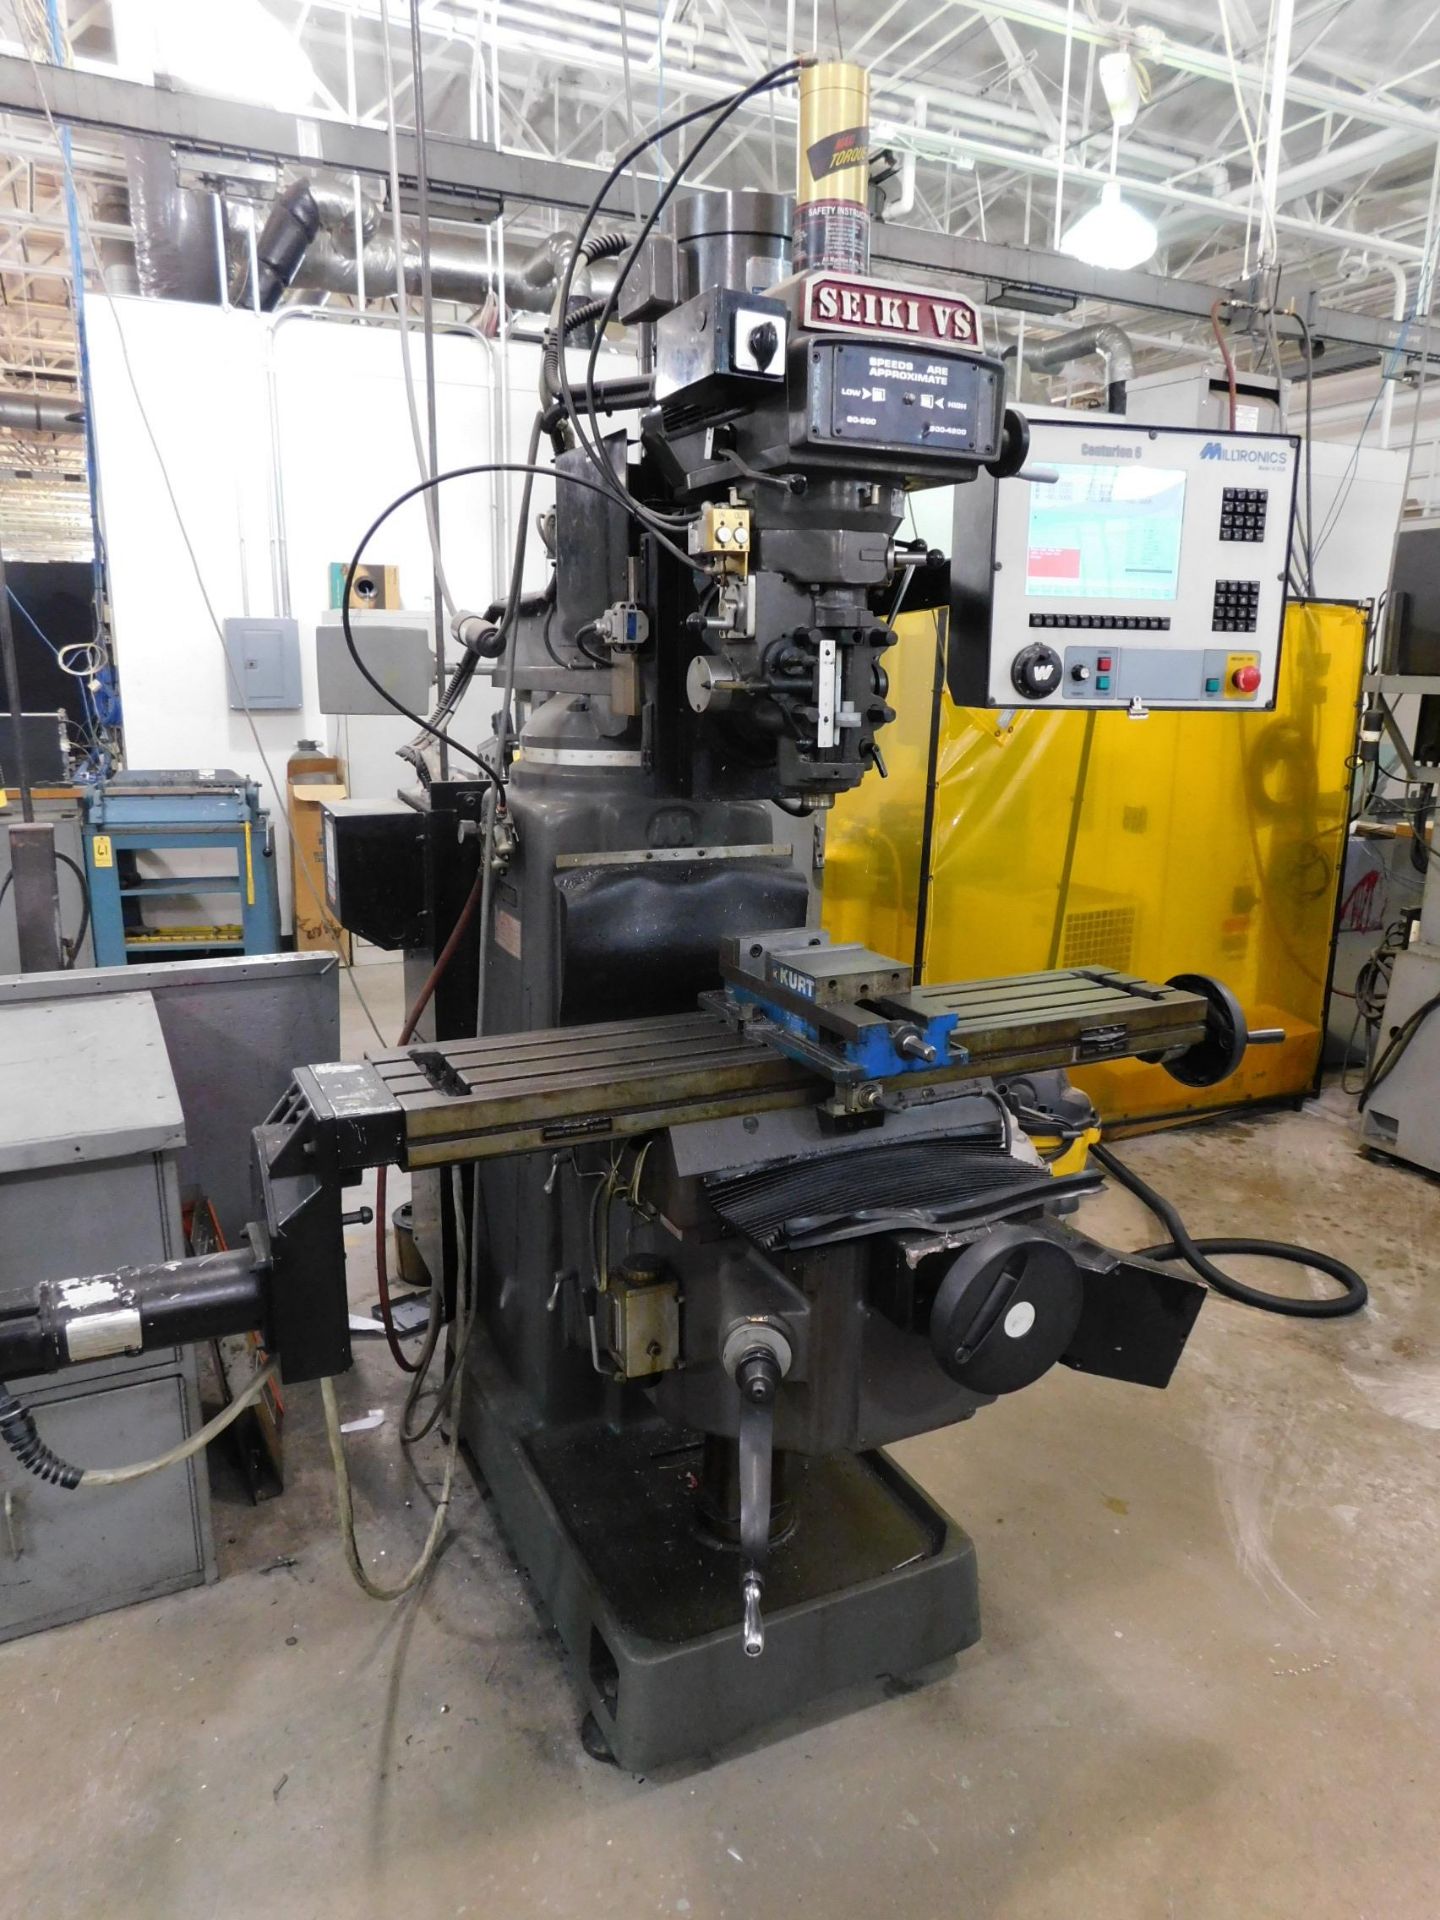 Seiki Model 4VH CNC Vertical Knee Mill, SN 1037, New in 2001, with Milltronics Centurion 6 CNC